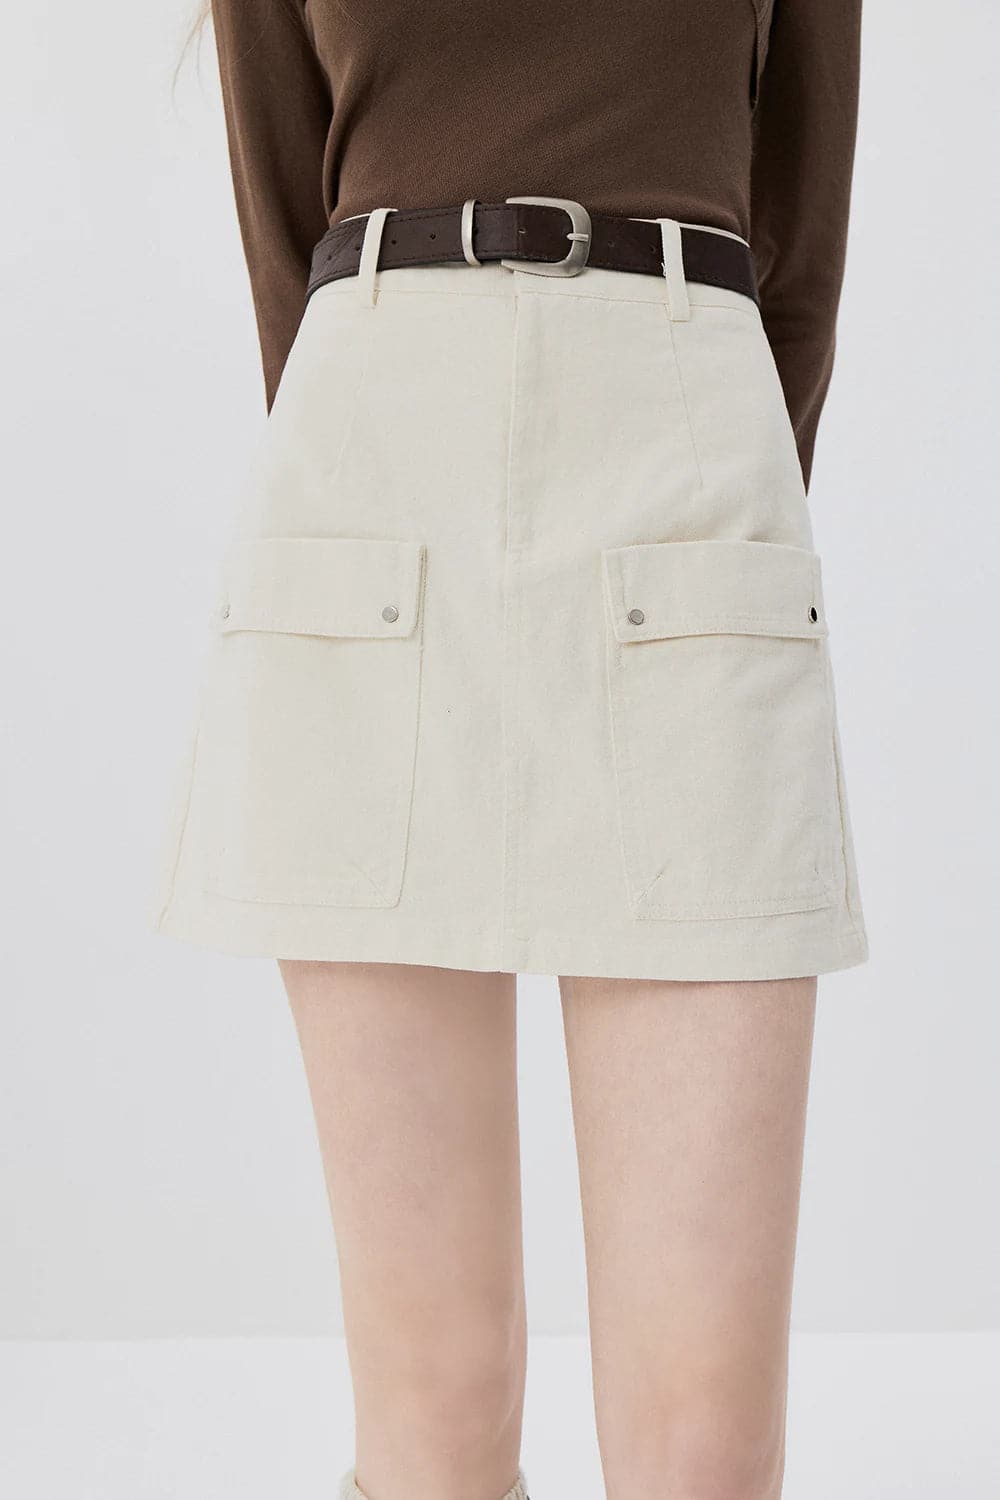 Chic Utility Skirt with Front Pockets